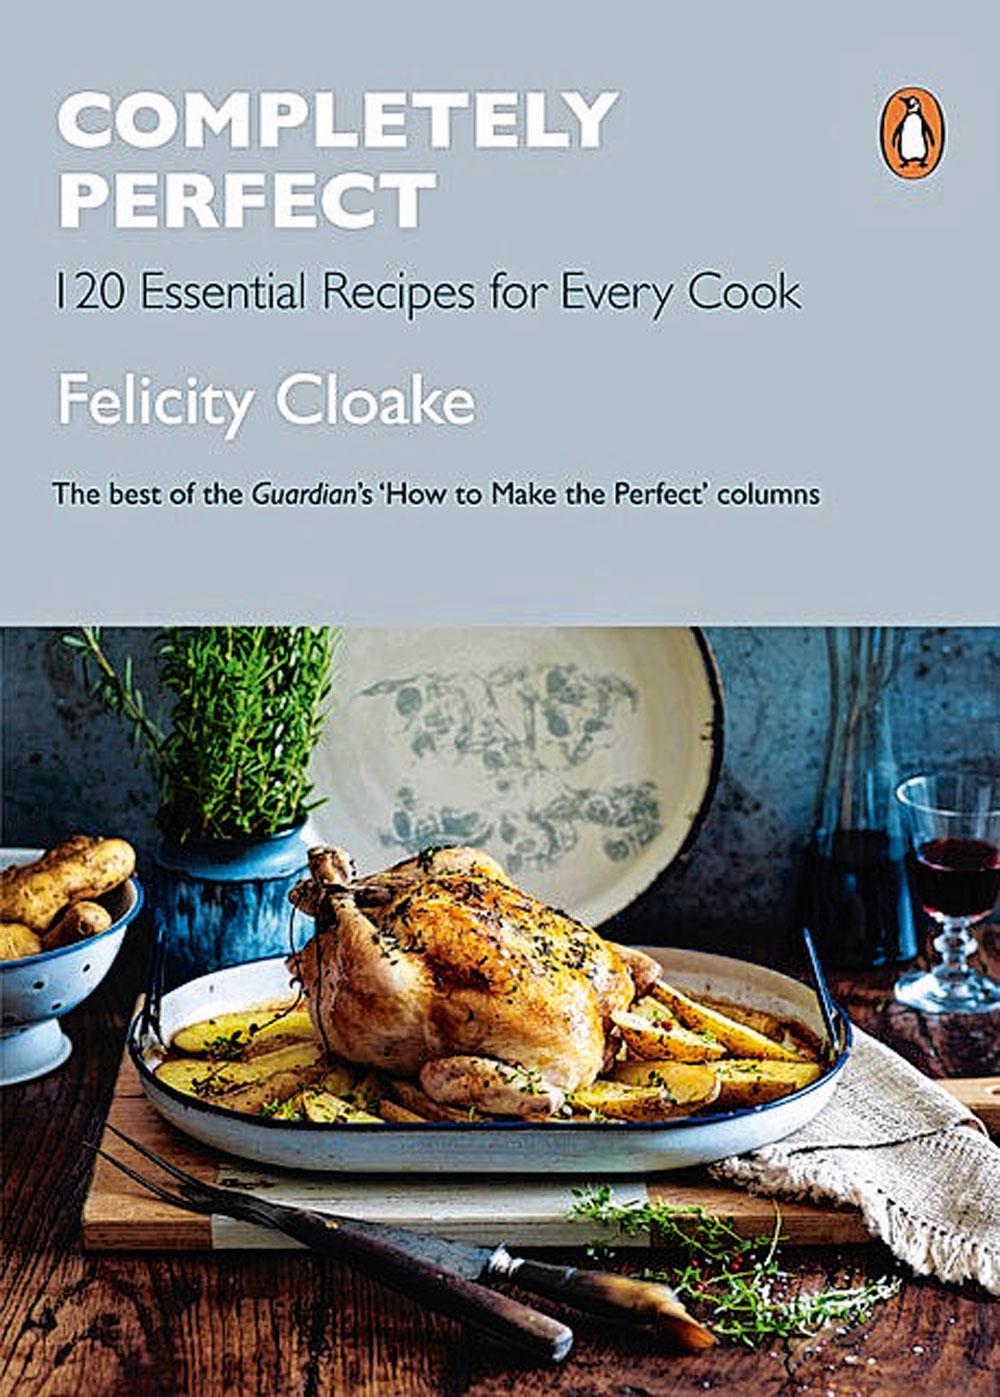 Completely Perfect: 120 Essential Recipes for Every Cook (alleen in het Engels), Felicity Cloake, Penguin, 18,95 euro.